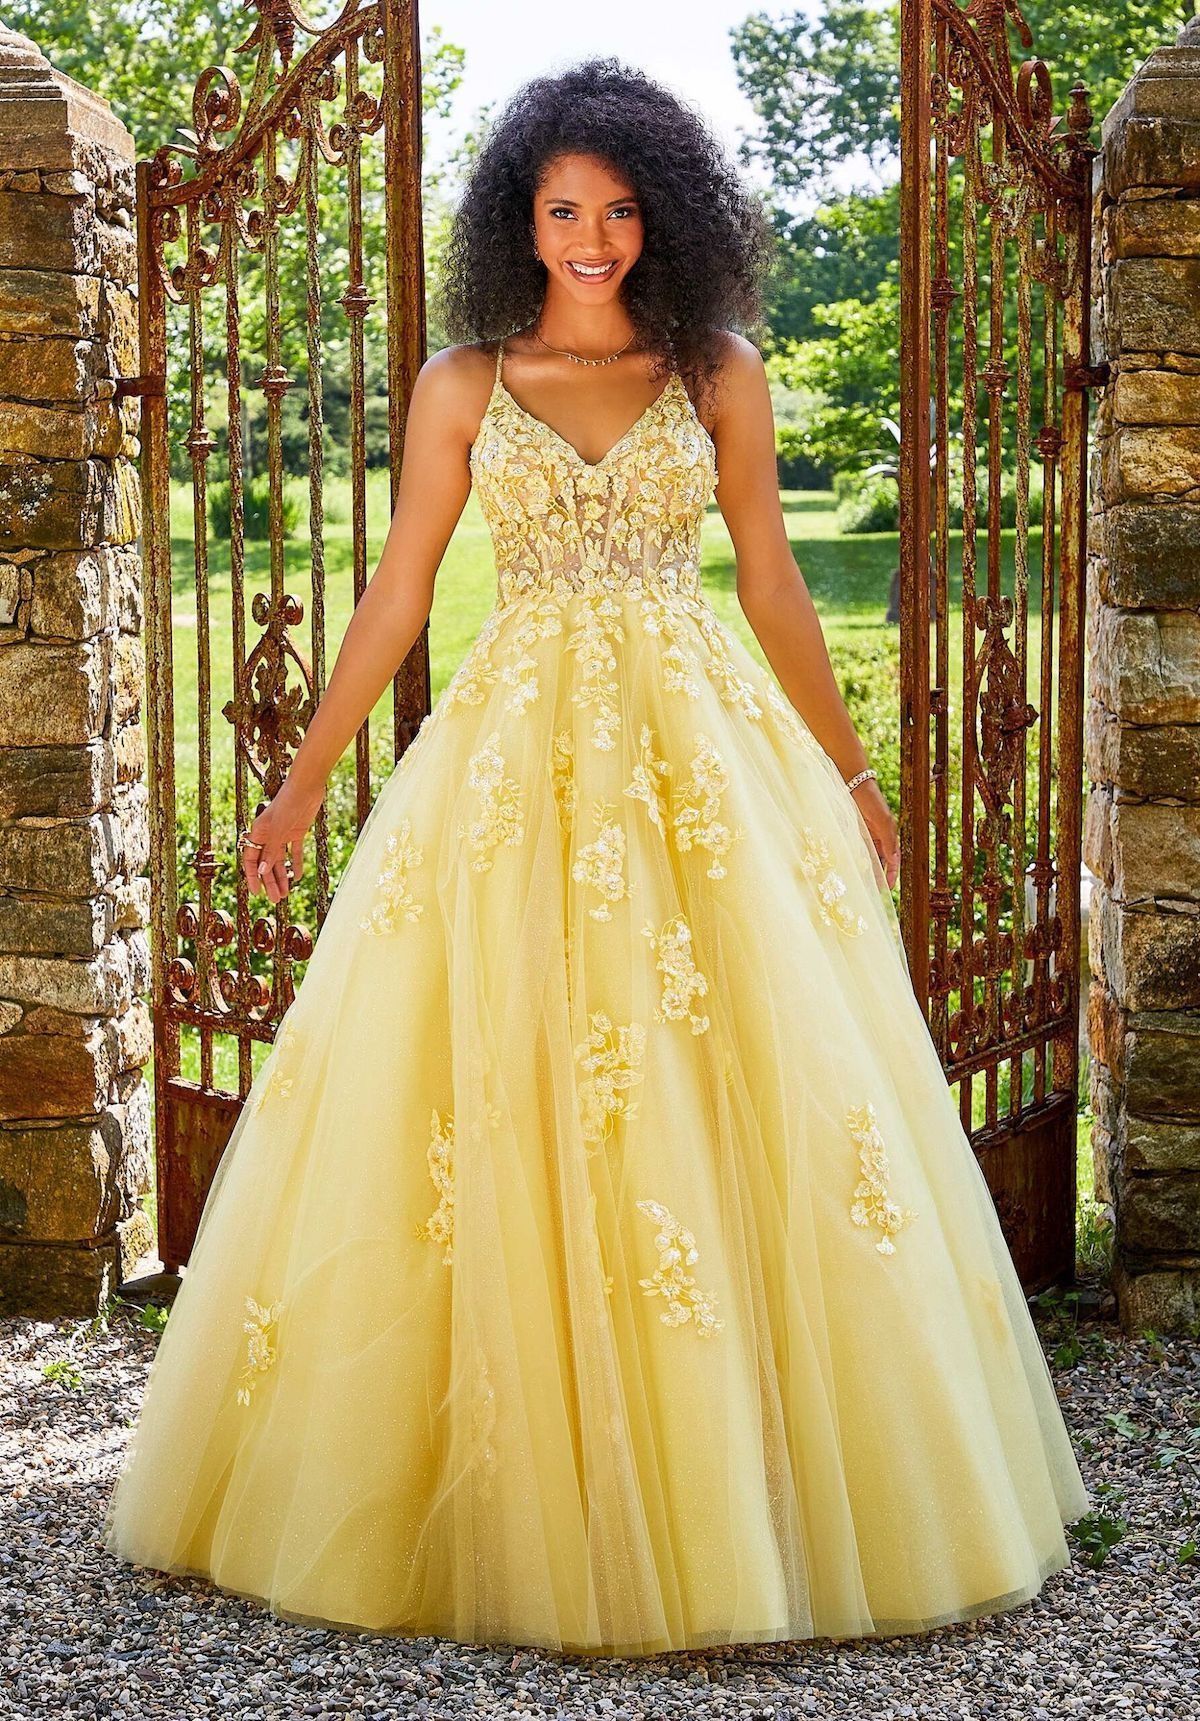 Flower Fairy Yellow Prom Dresses 2019 A-Line / Princess Off-The-Shoulder  Appliques Lace Flower Pearl